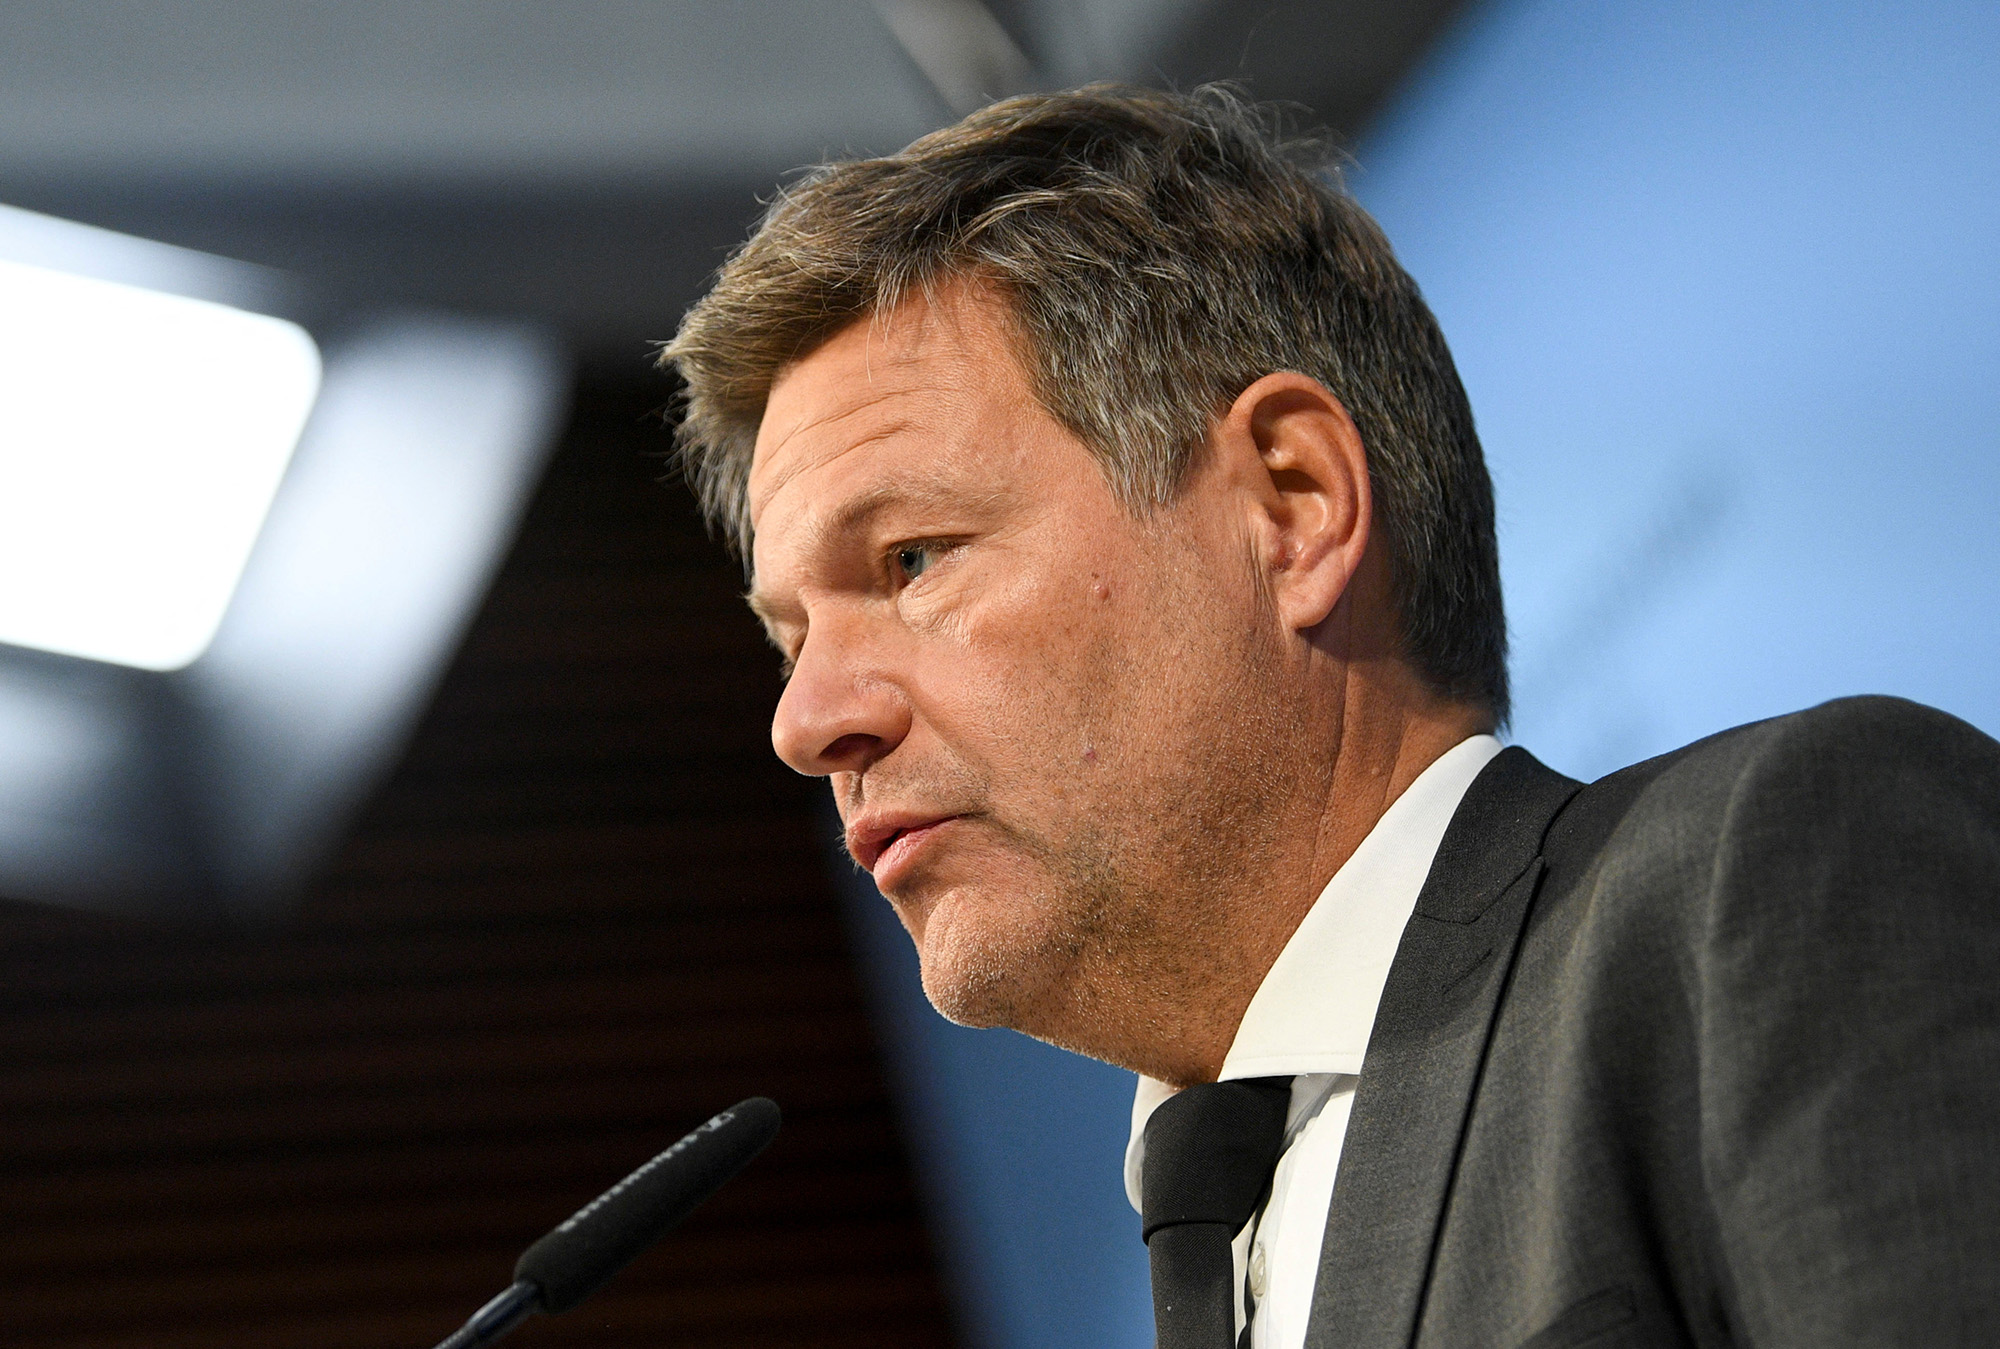 German Economy Minister Robert Habeck attends a news conference in Berlin, Germany, on September 21.